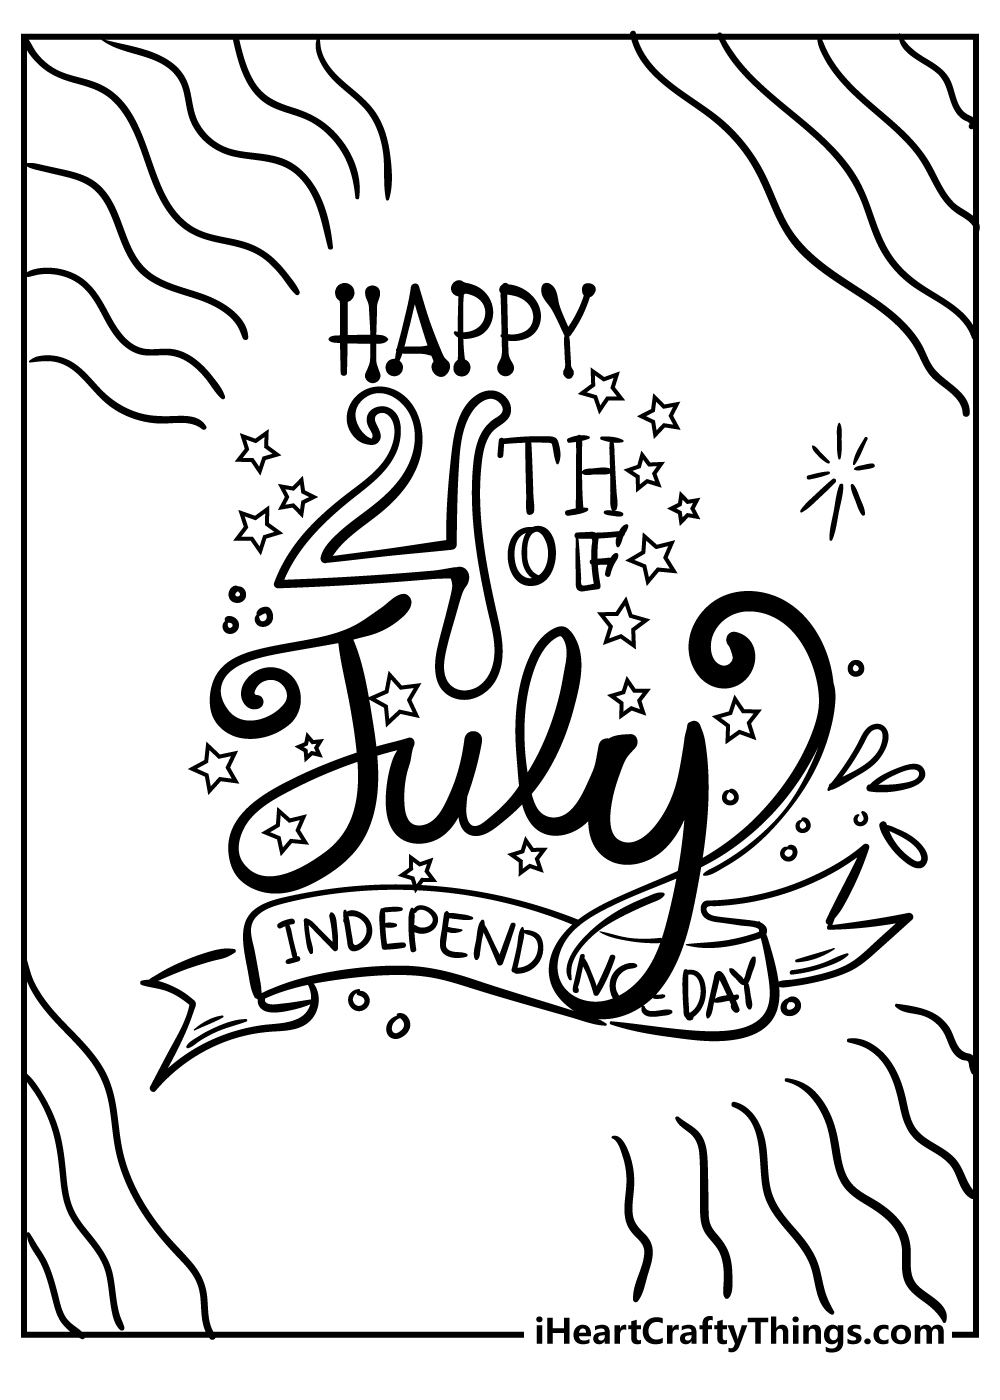 Celebrate Freedom with 4th of July: 180+ Free Coloring Pages 87